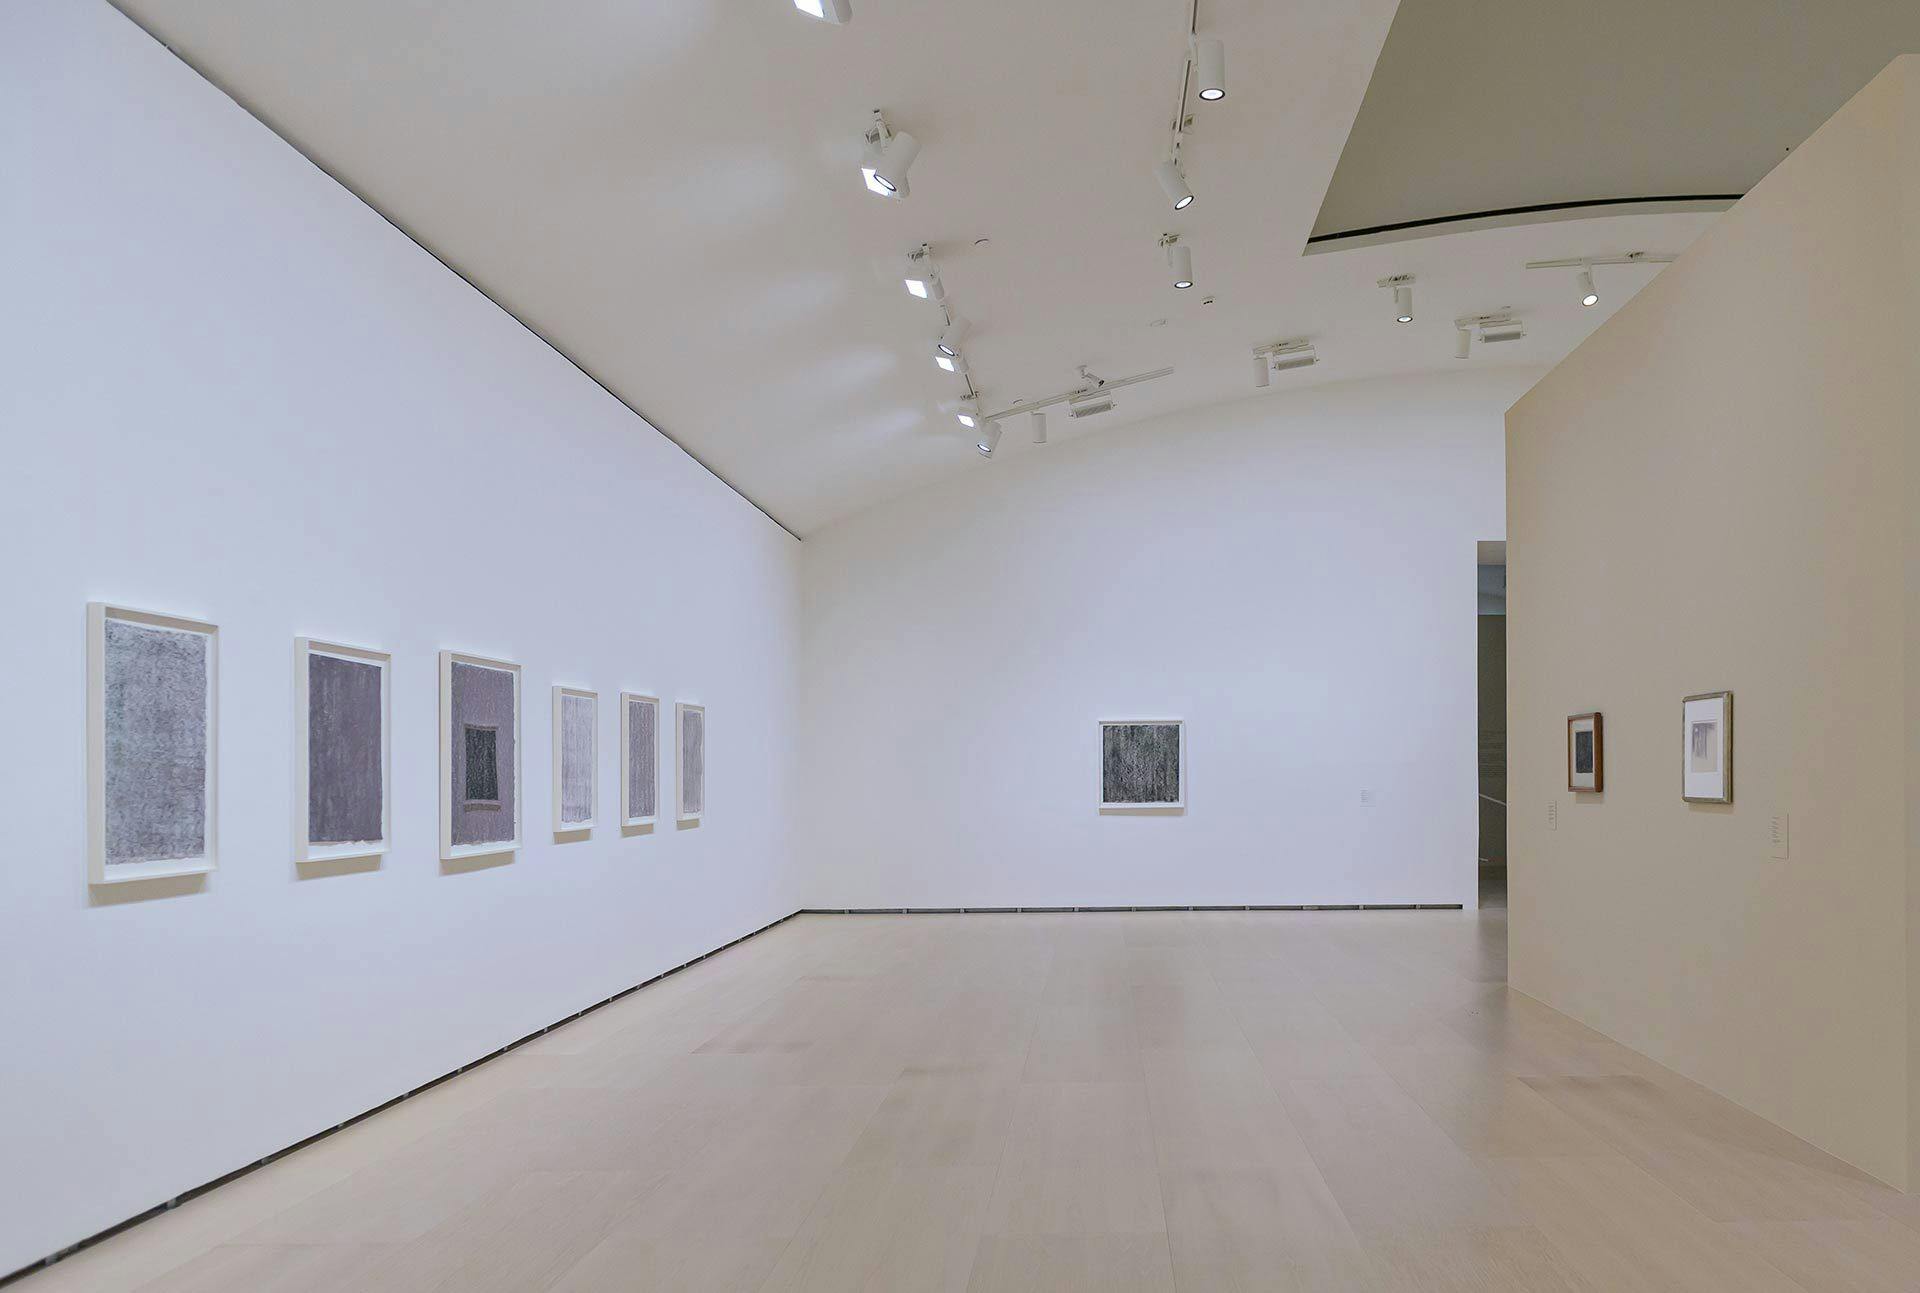 Installation view of the exhibition Serra/Seurat. Drawings at the Guggenheim Museum Bilbao, dated 2022.